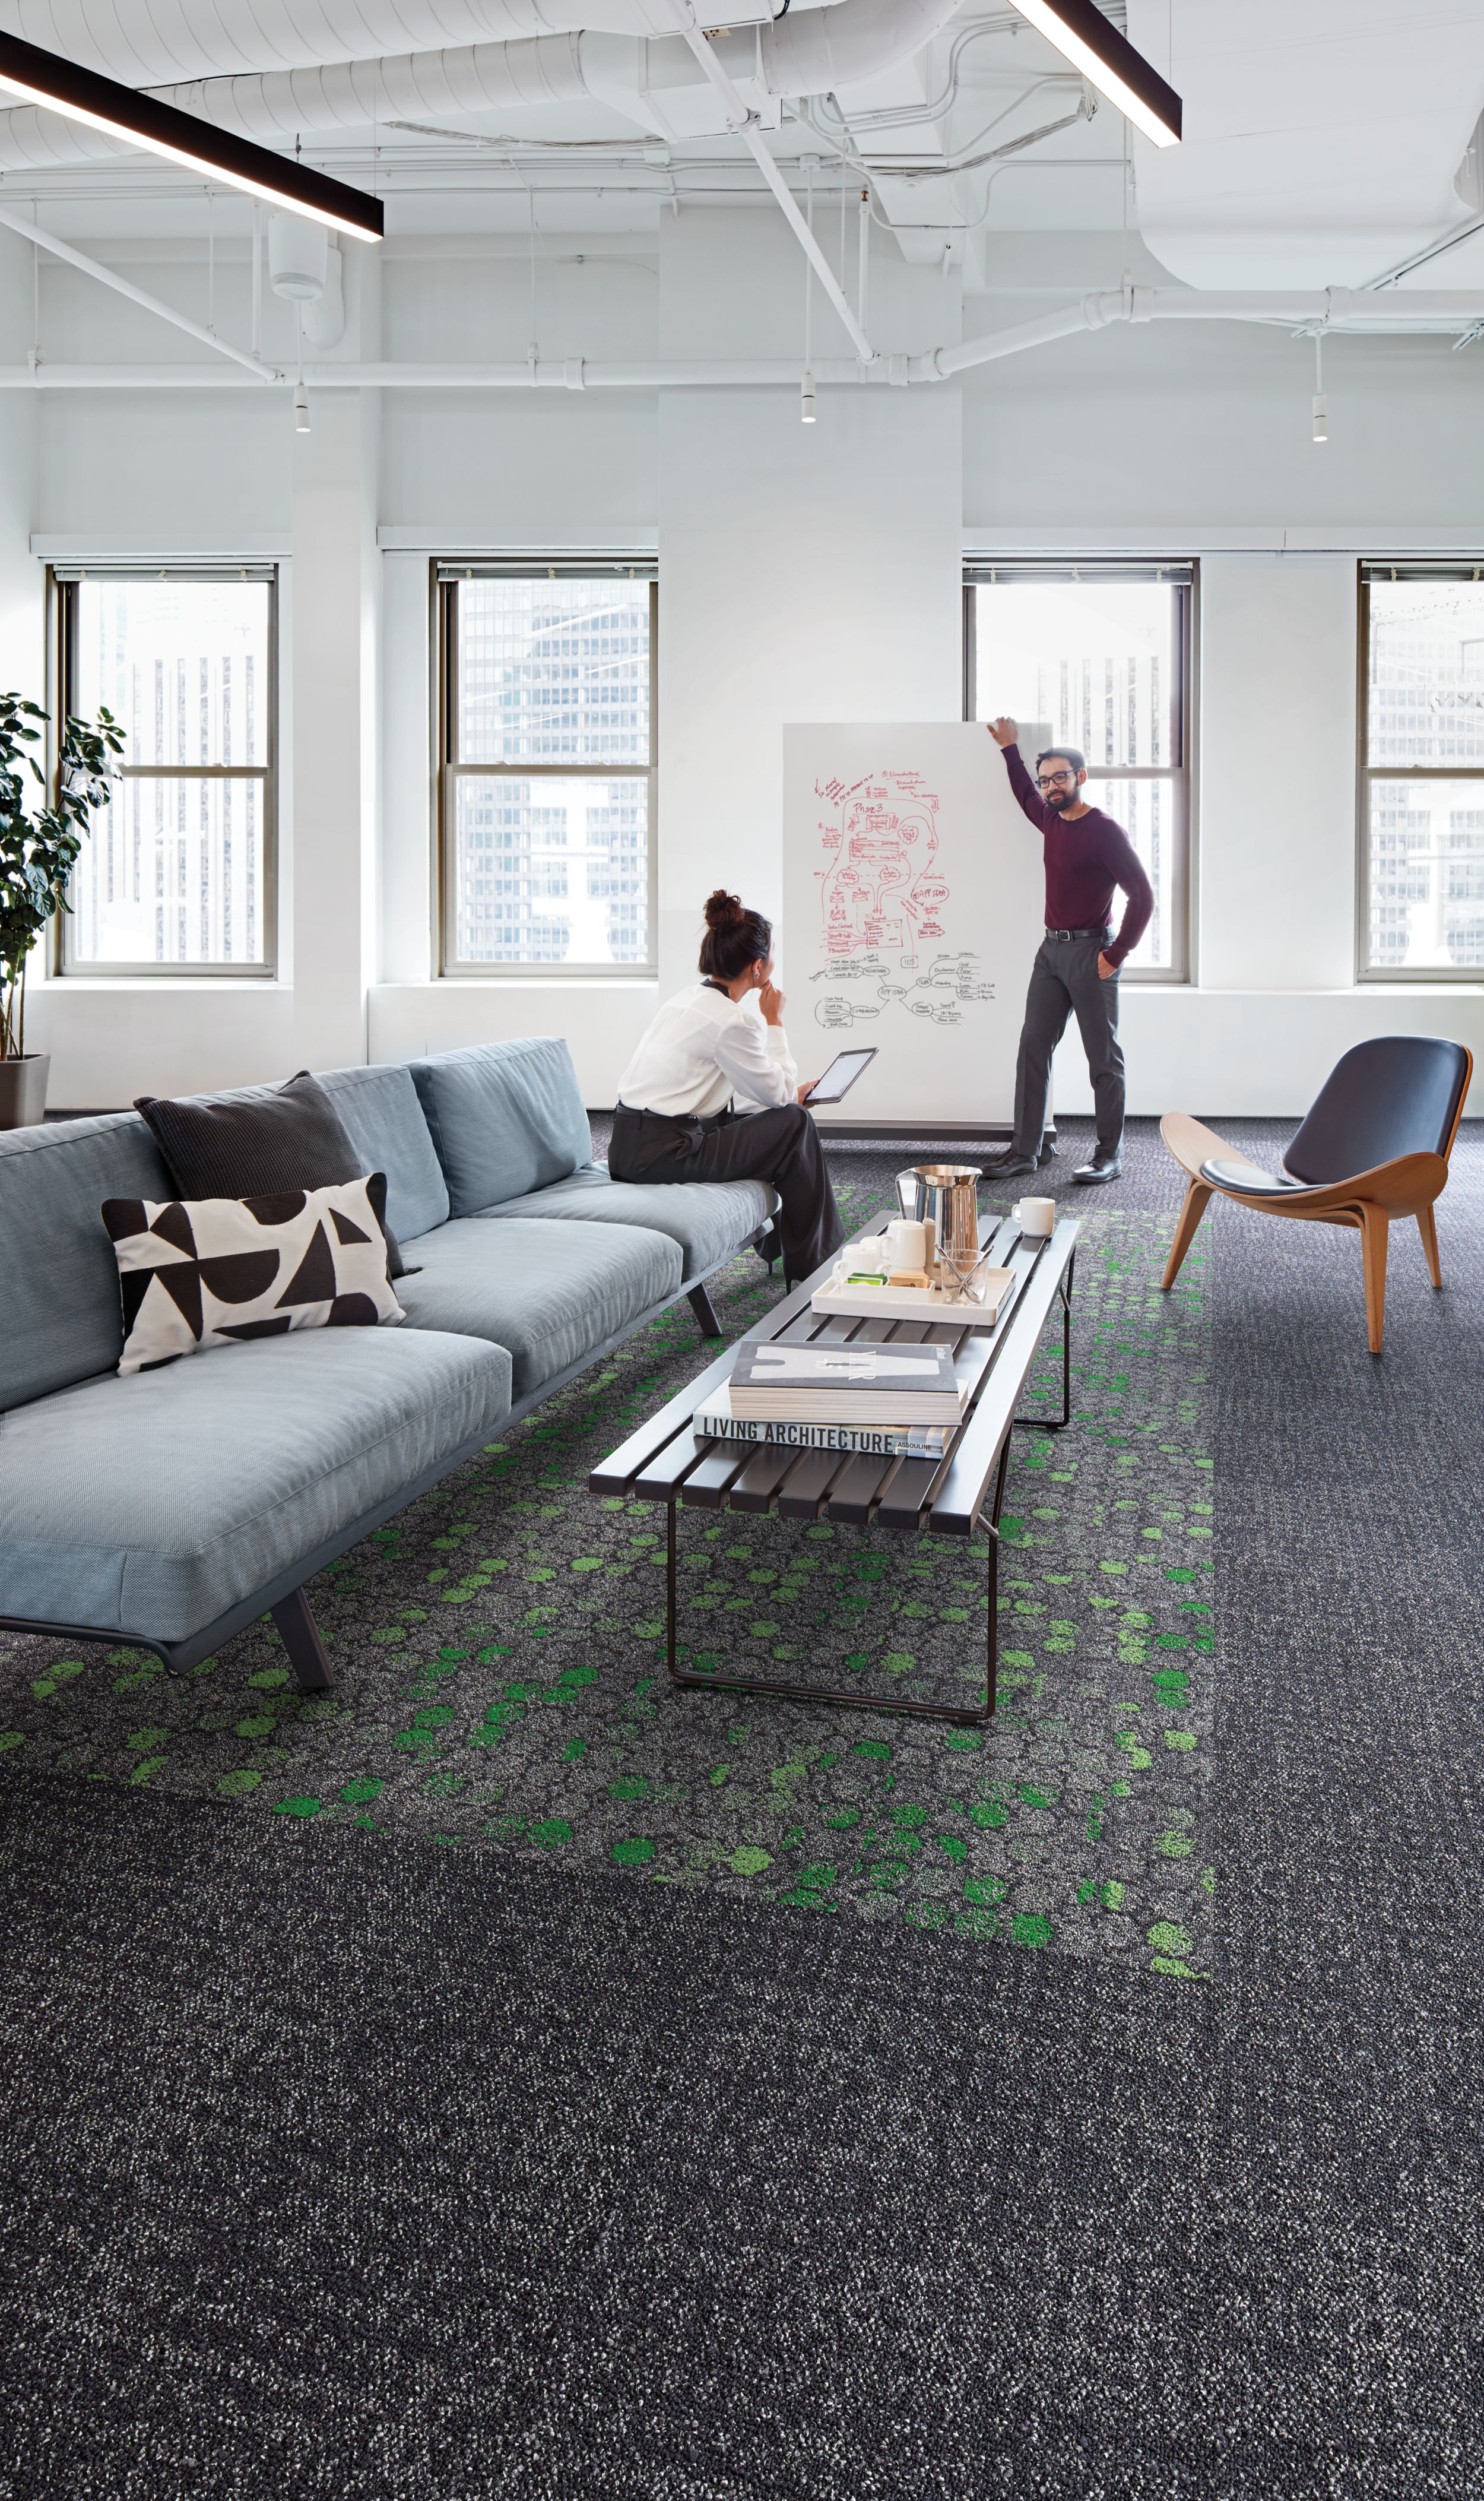 Interface Broome Street and Wheler Street in open office area with people imagen número 10